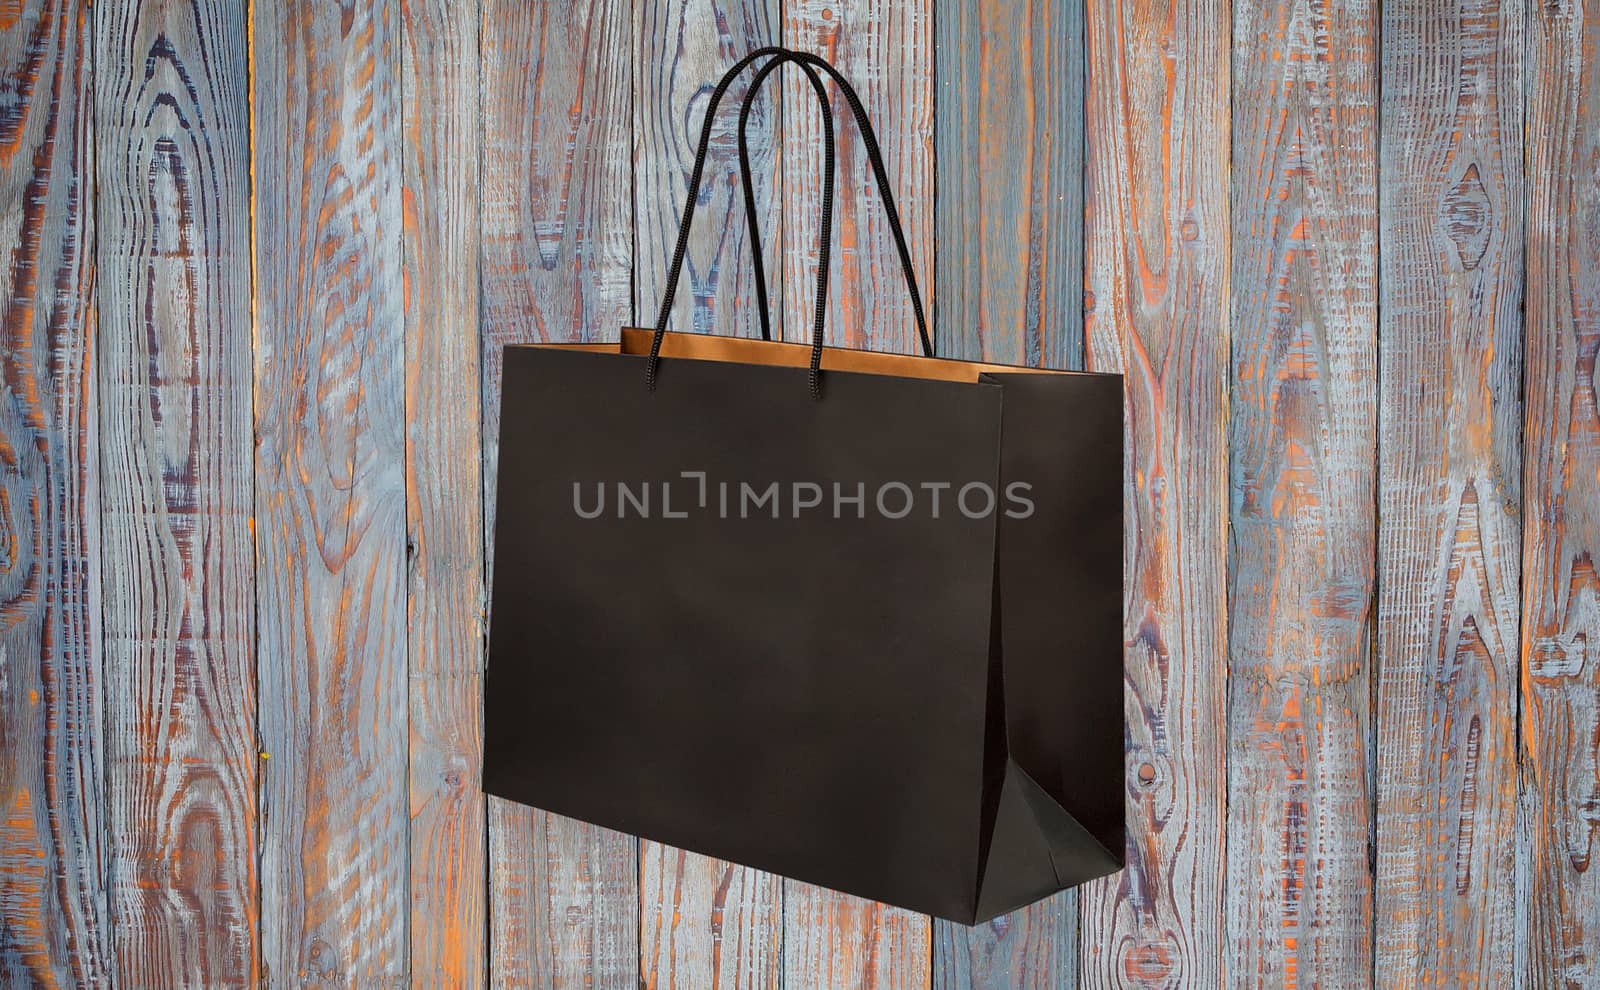 paper bag for shopping on a wooden background by boys1983@mail.ru